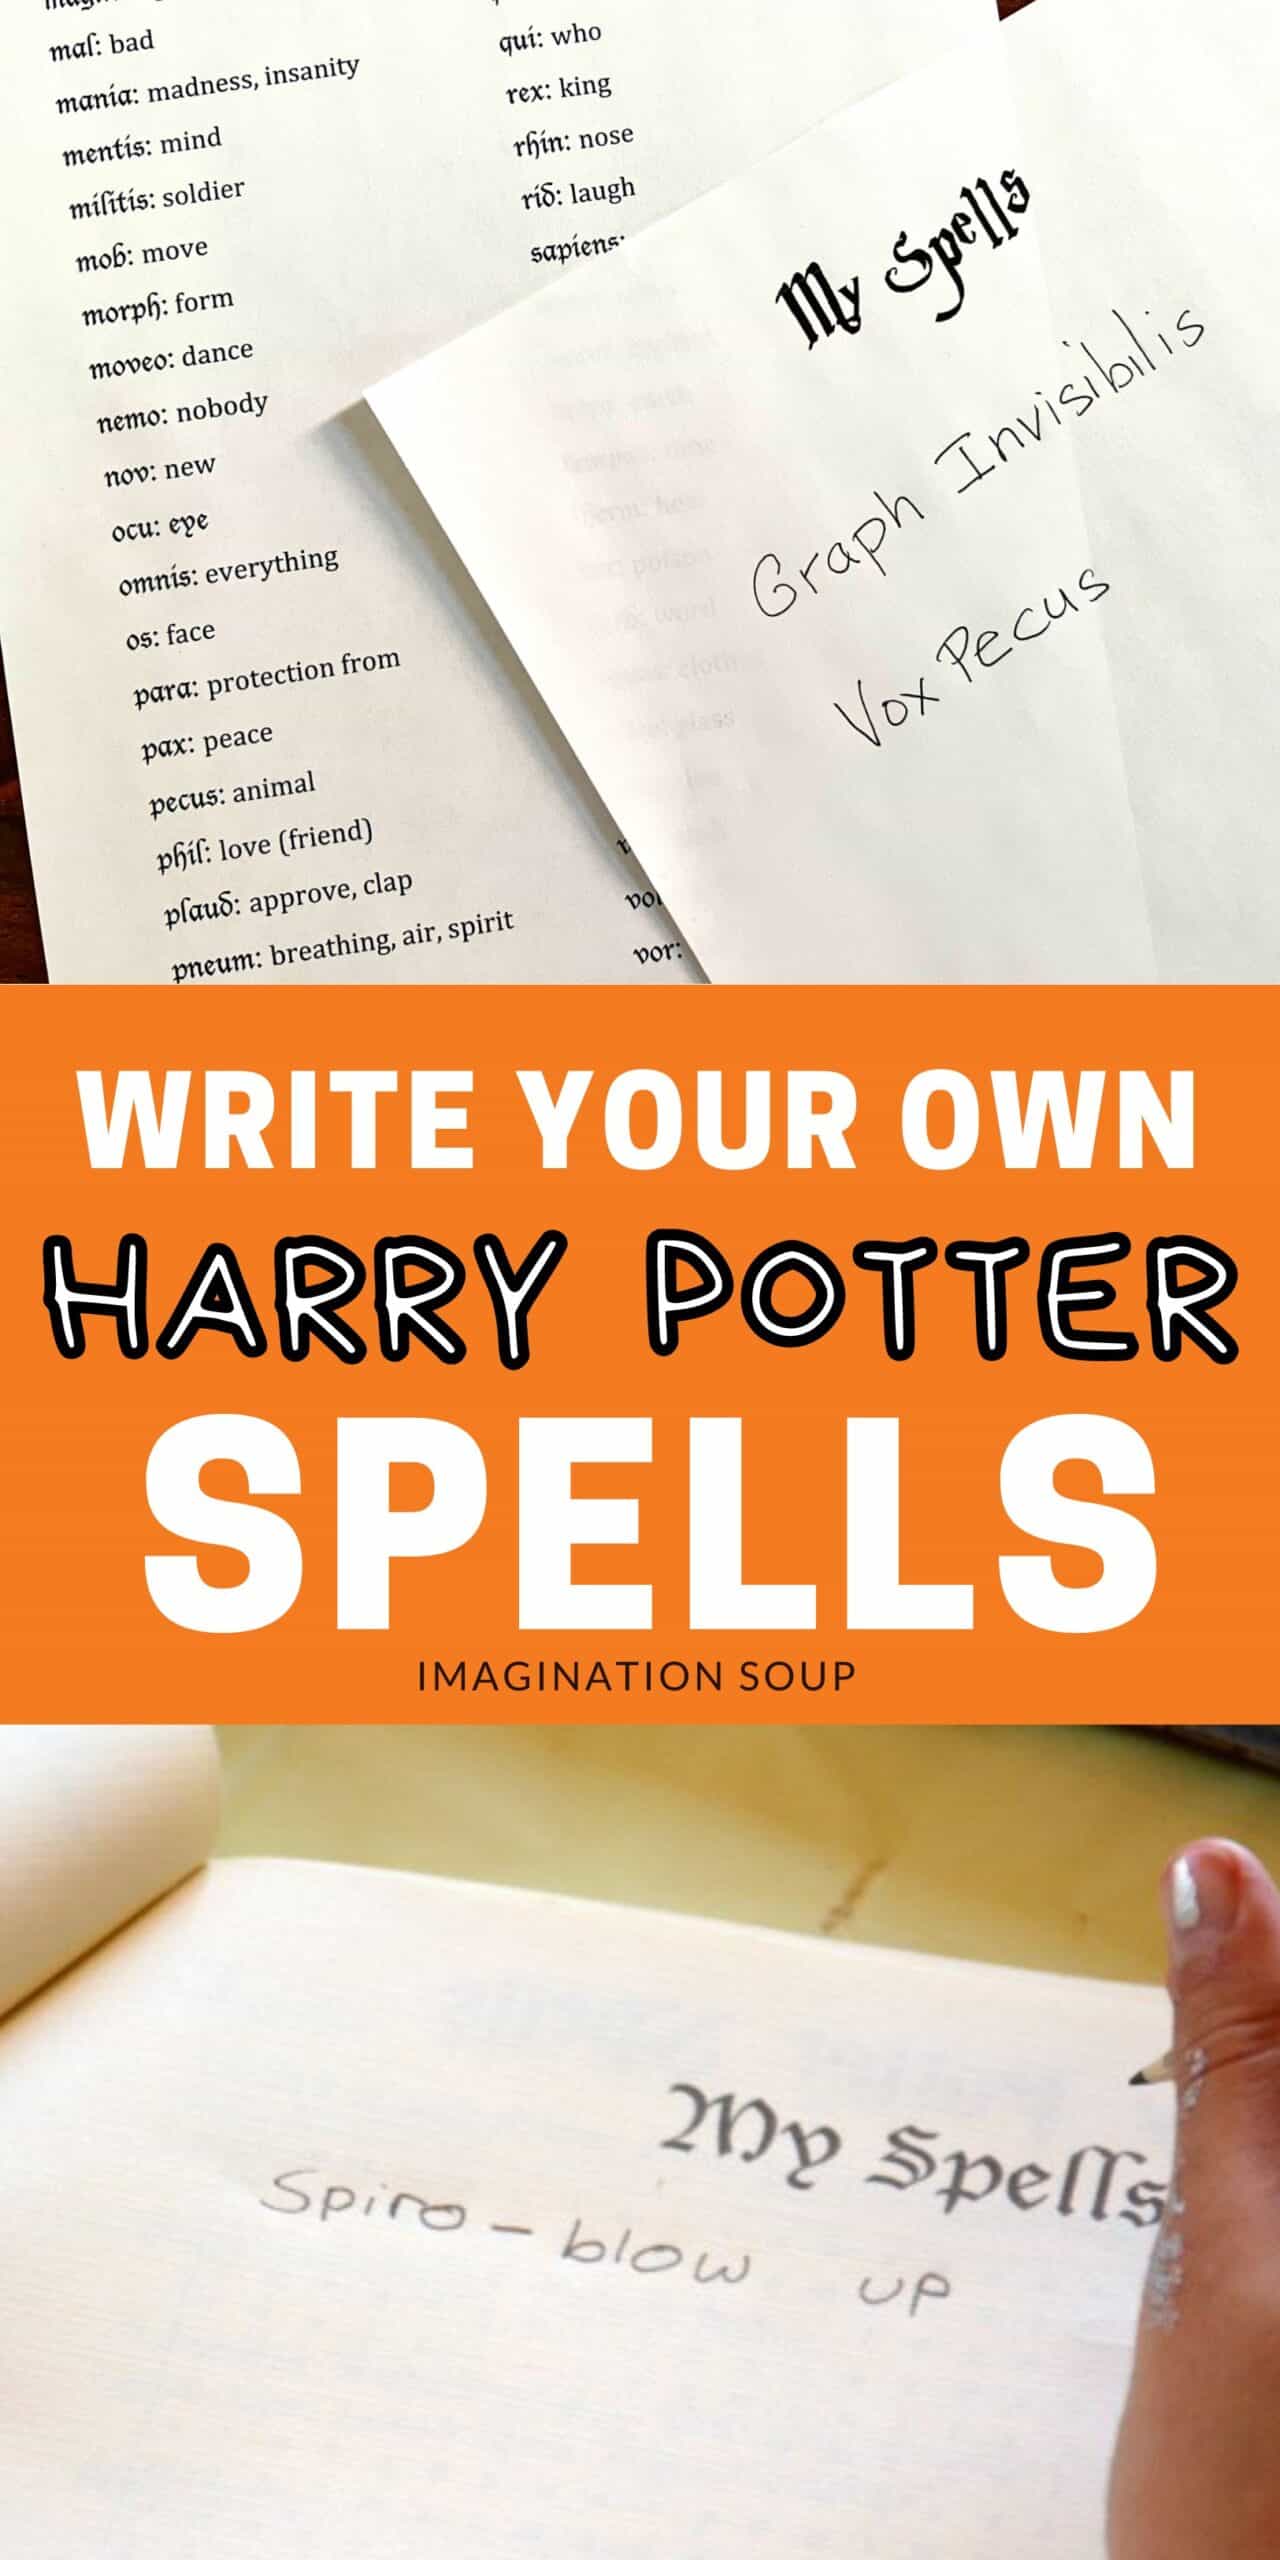 Write Your Own Latin Based Harry Potter Spells - Imagination Soup